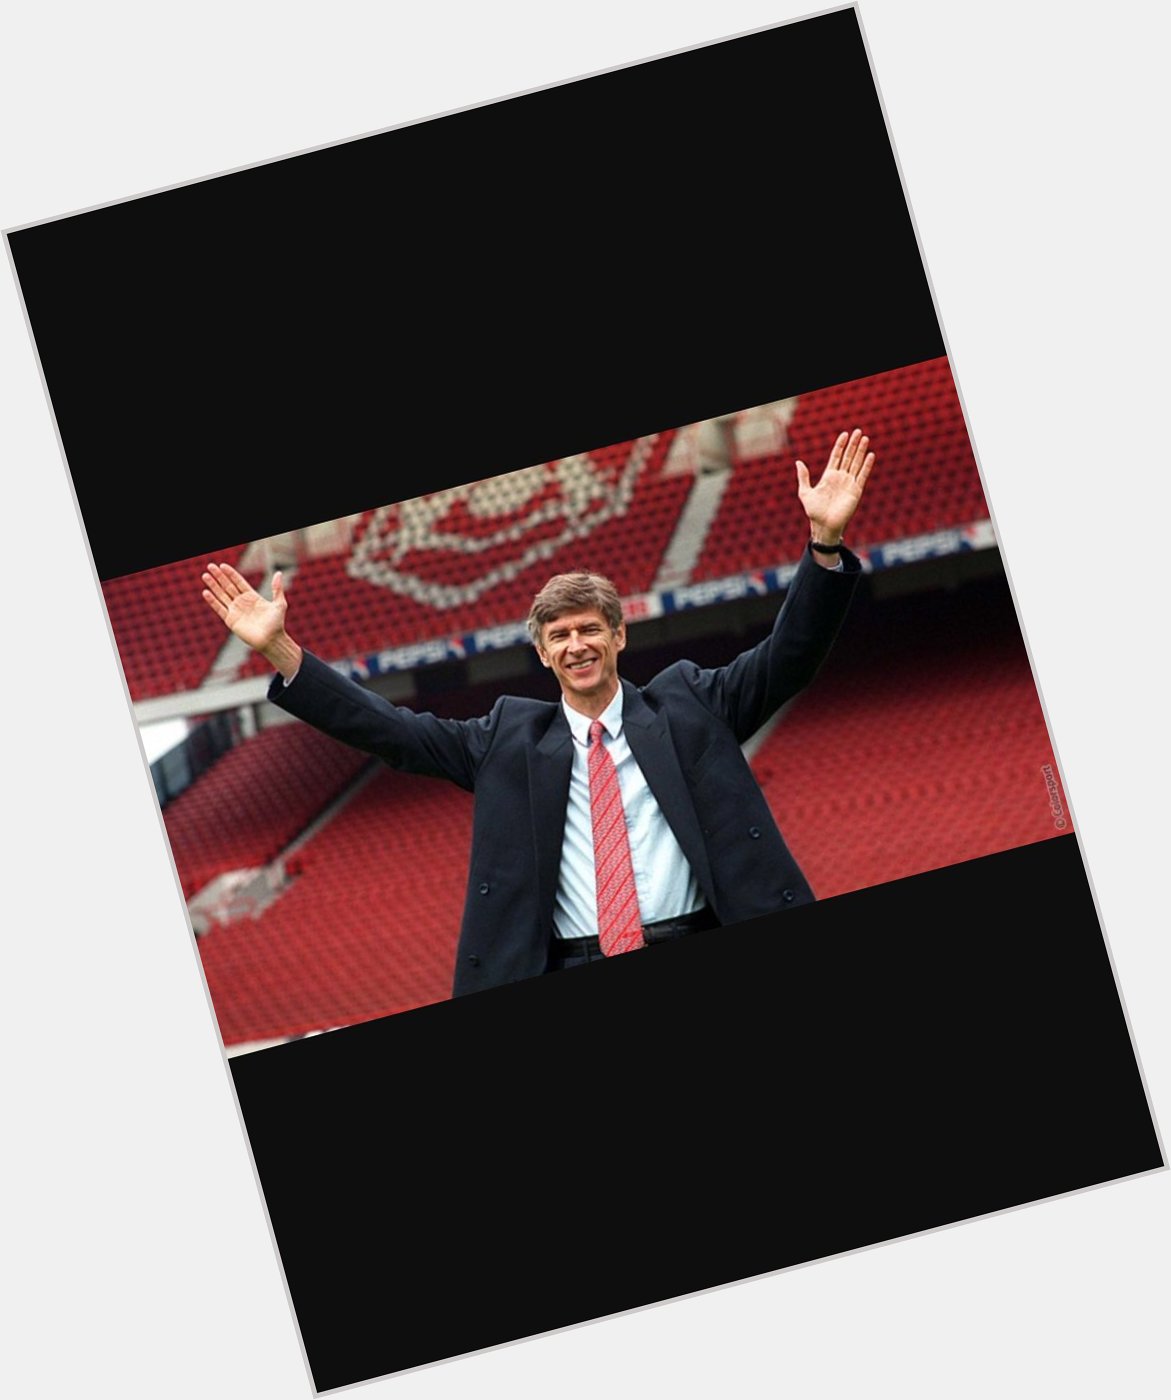 Happy Birthday Arsène Wenger

3 PL
7 FA Cup s
1 Gold PL Trophy
21 Years 